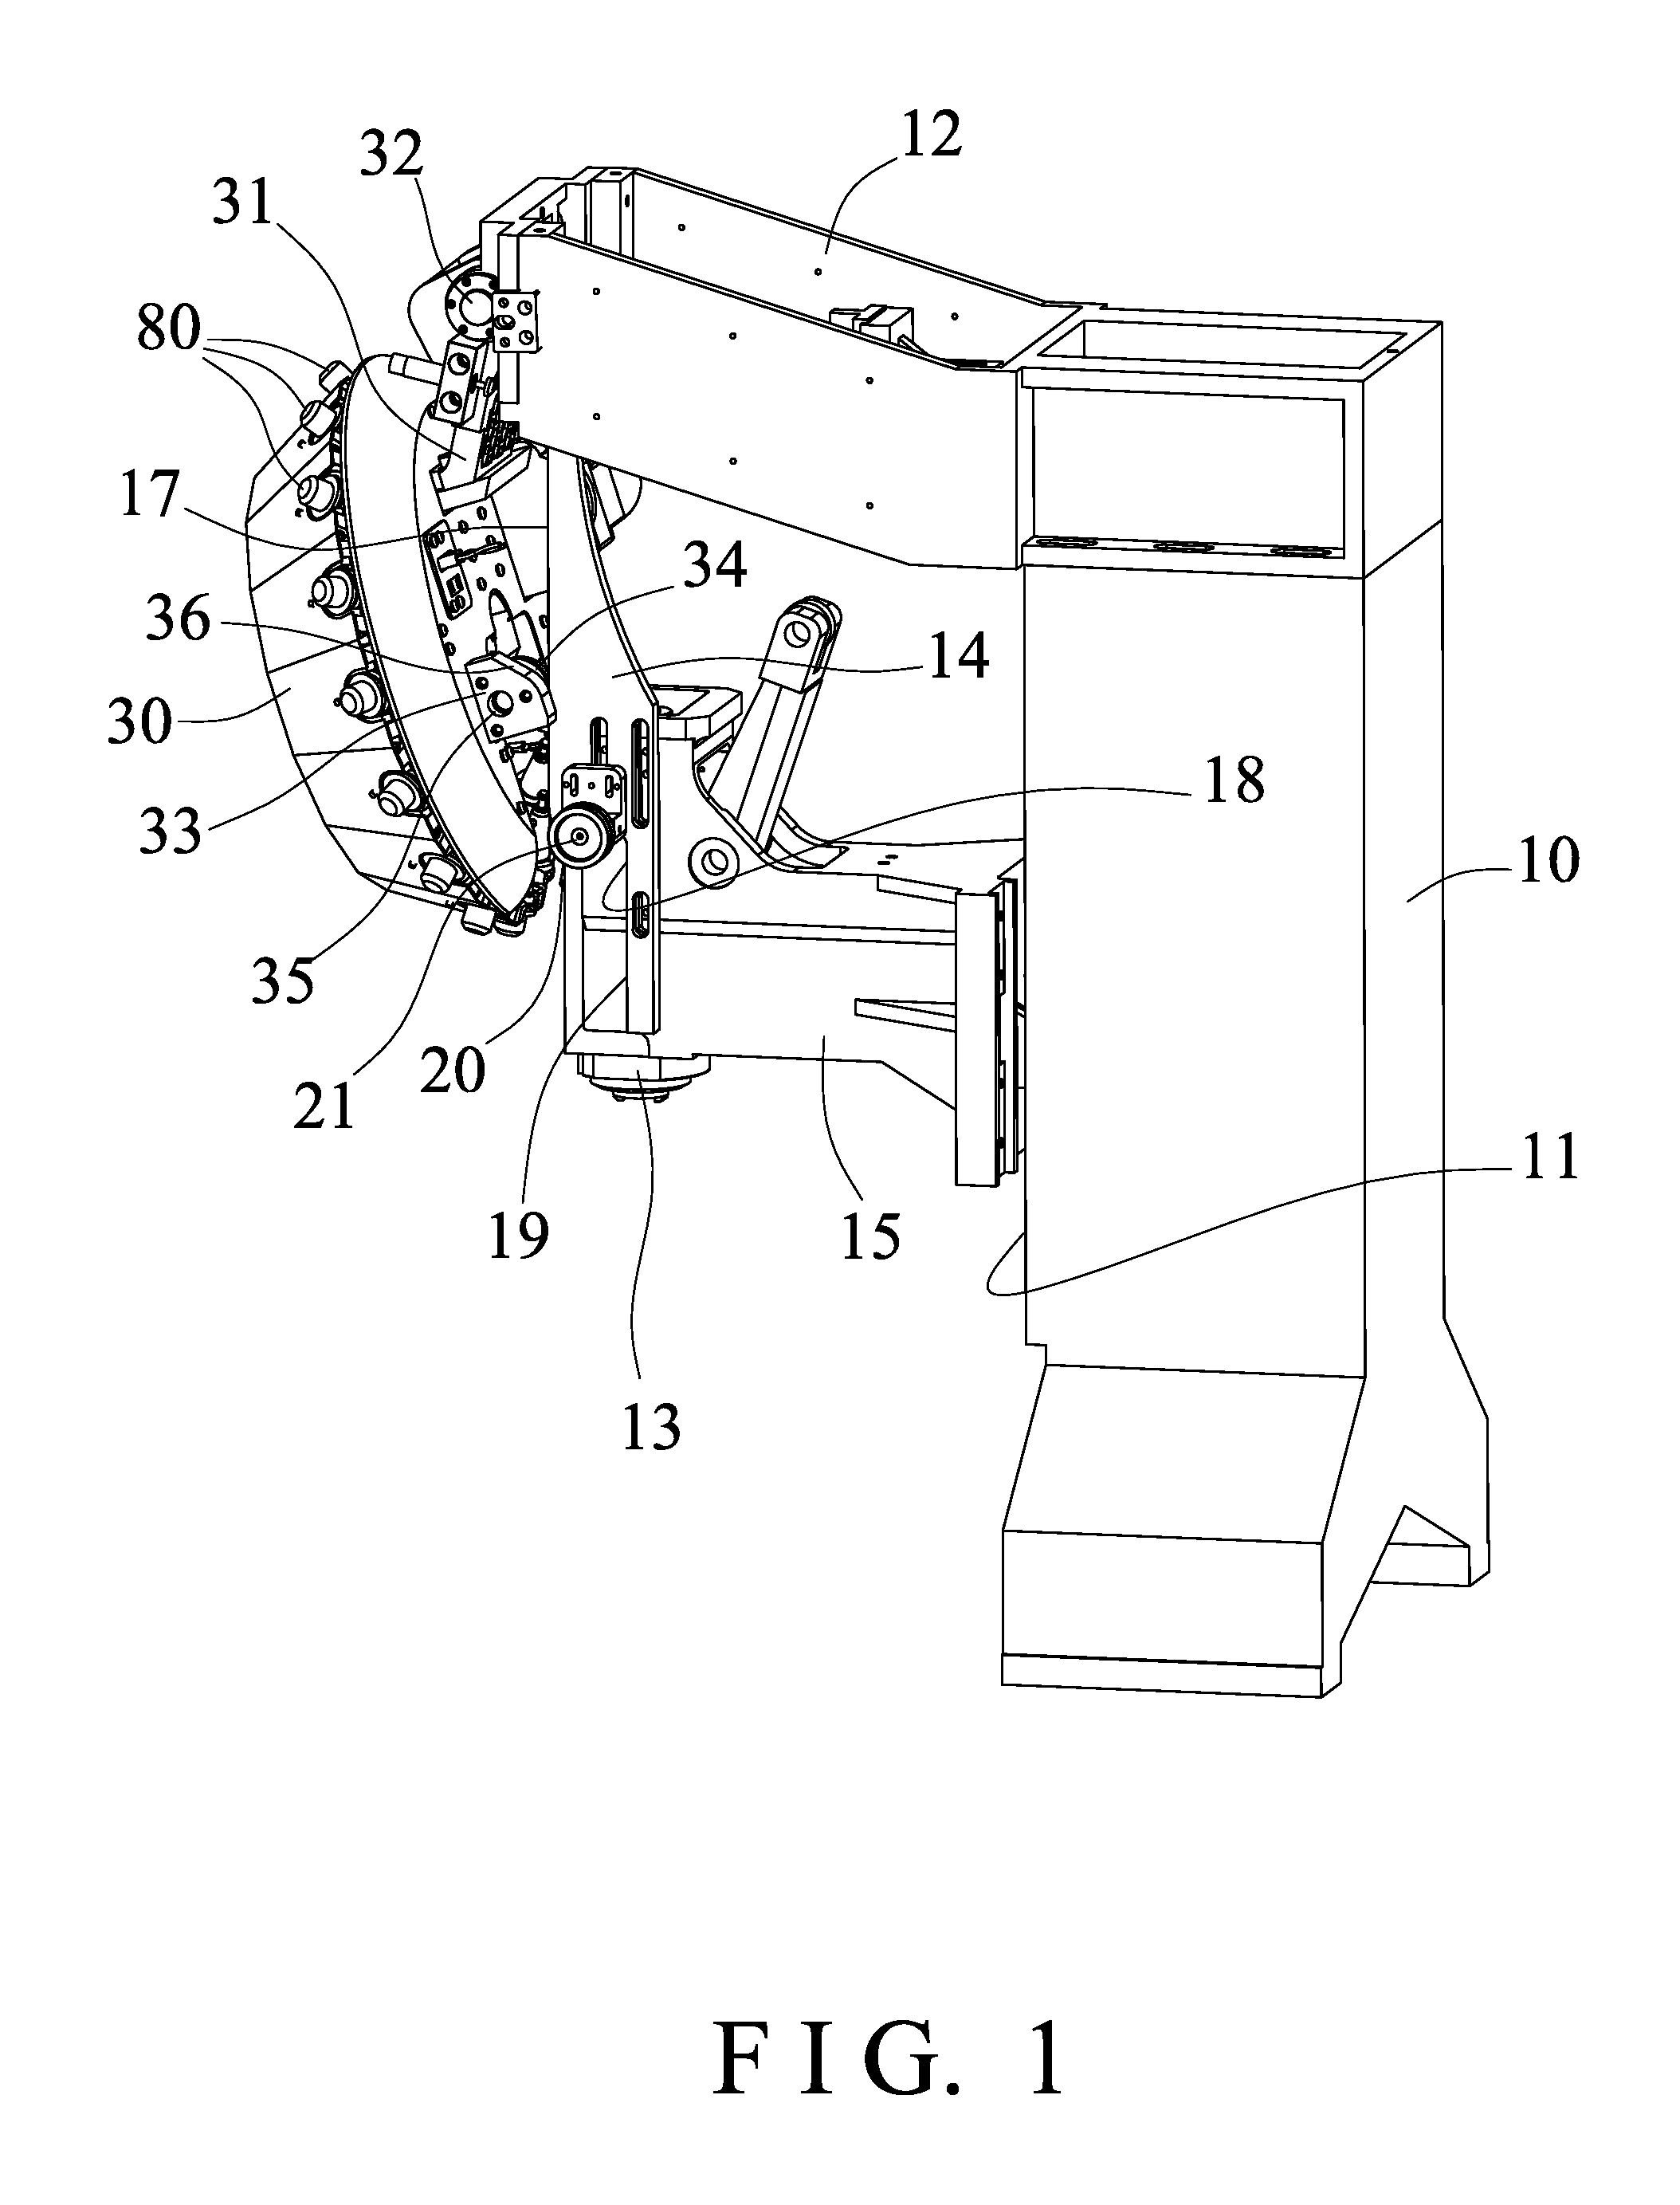 Tool changer for machine tool